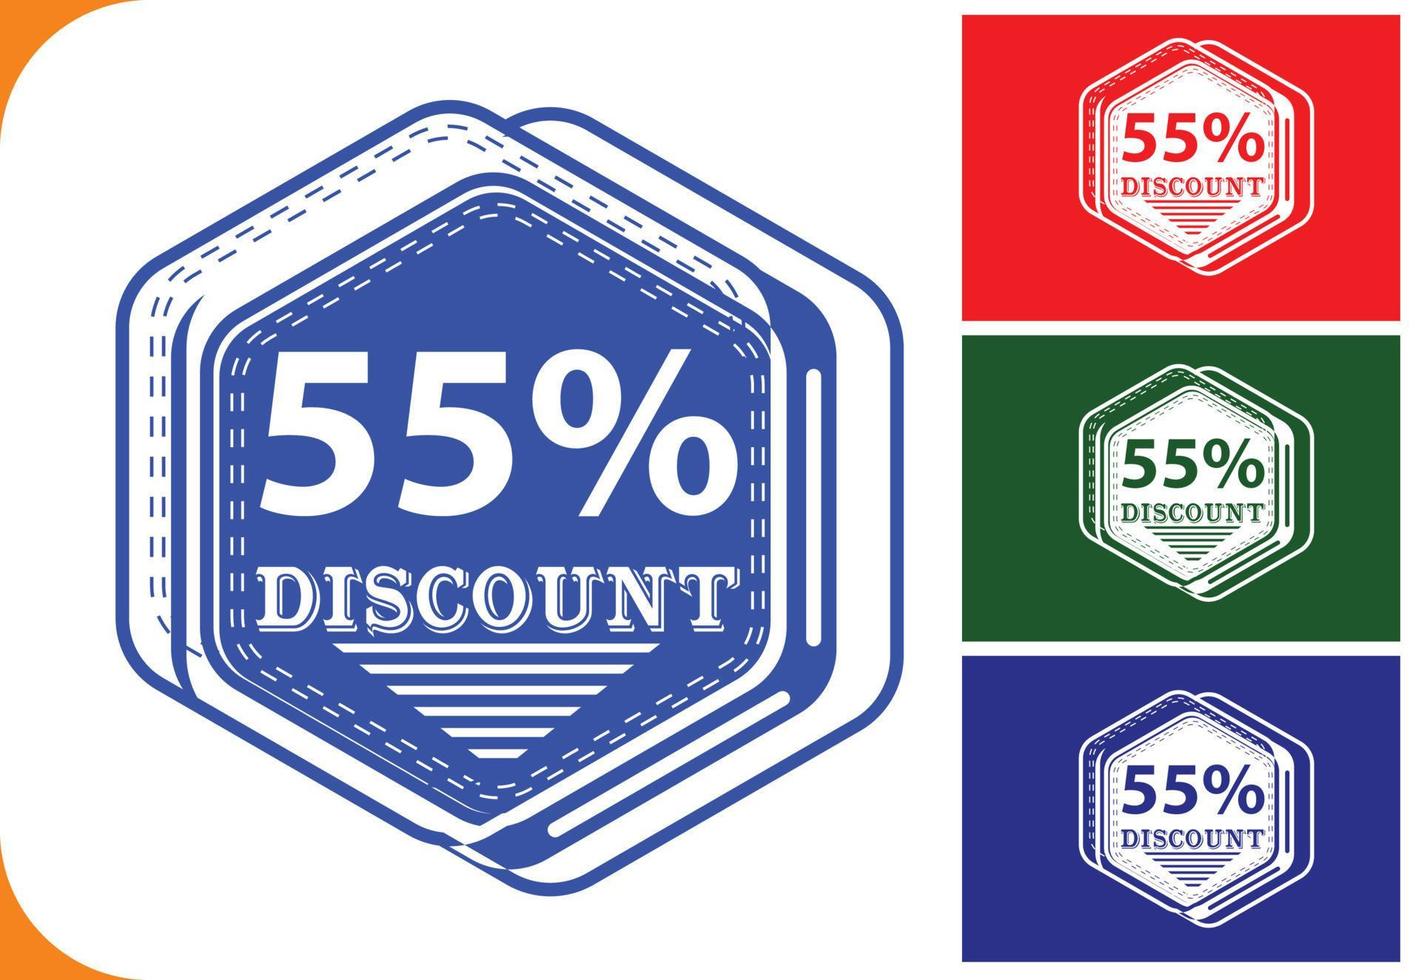 55 percent off new offer logo and icon design template vector